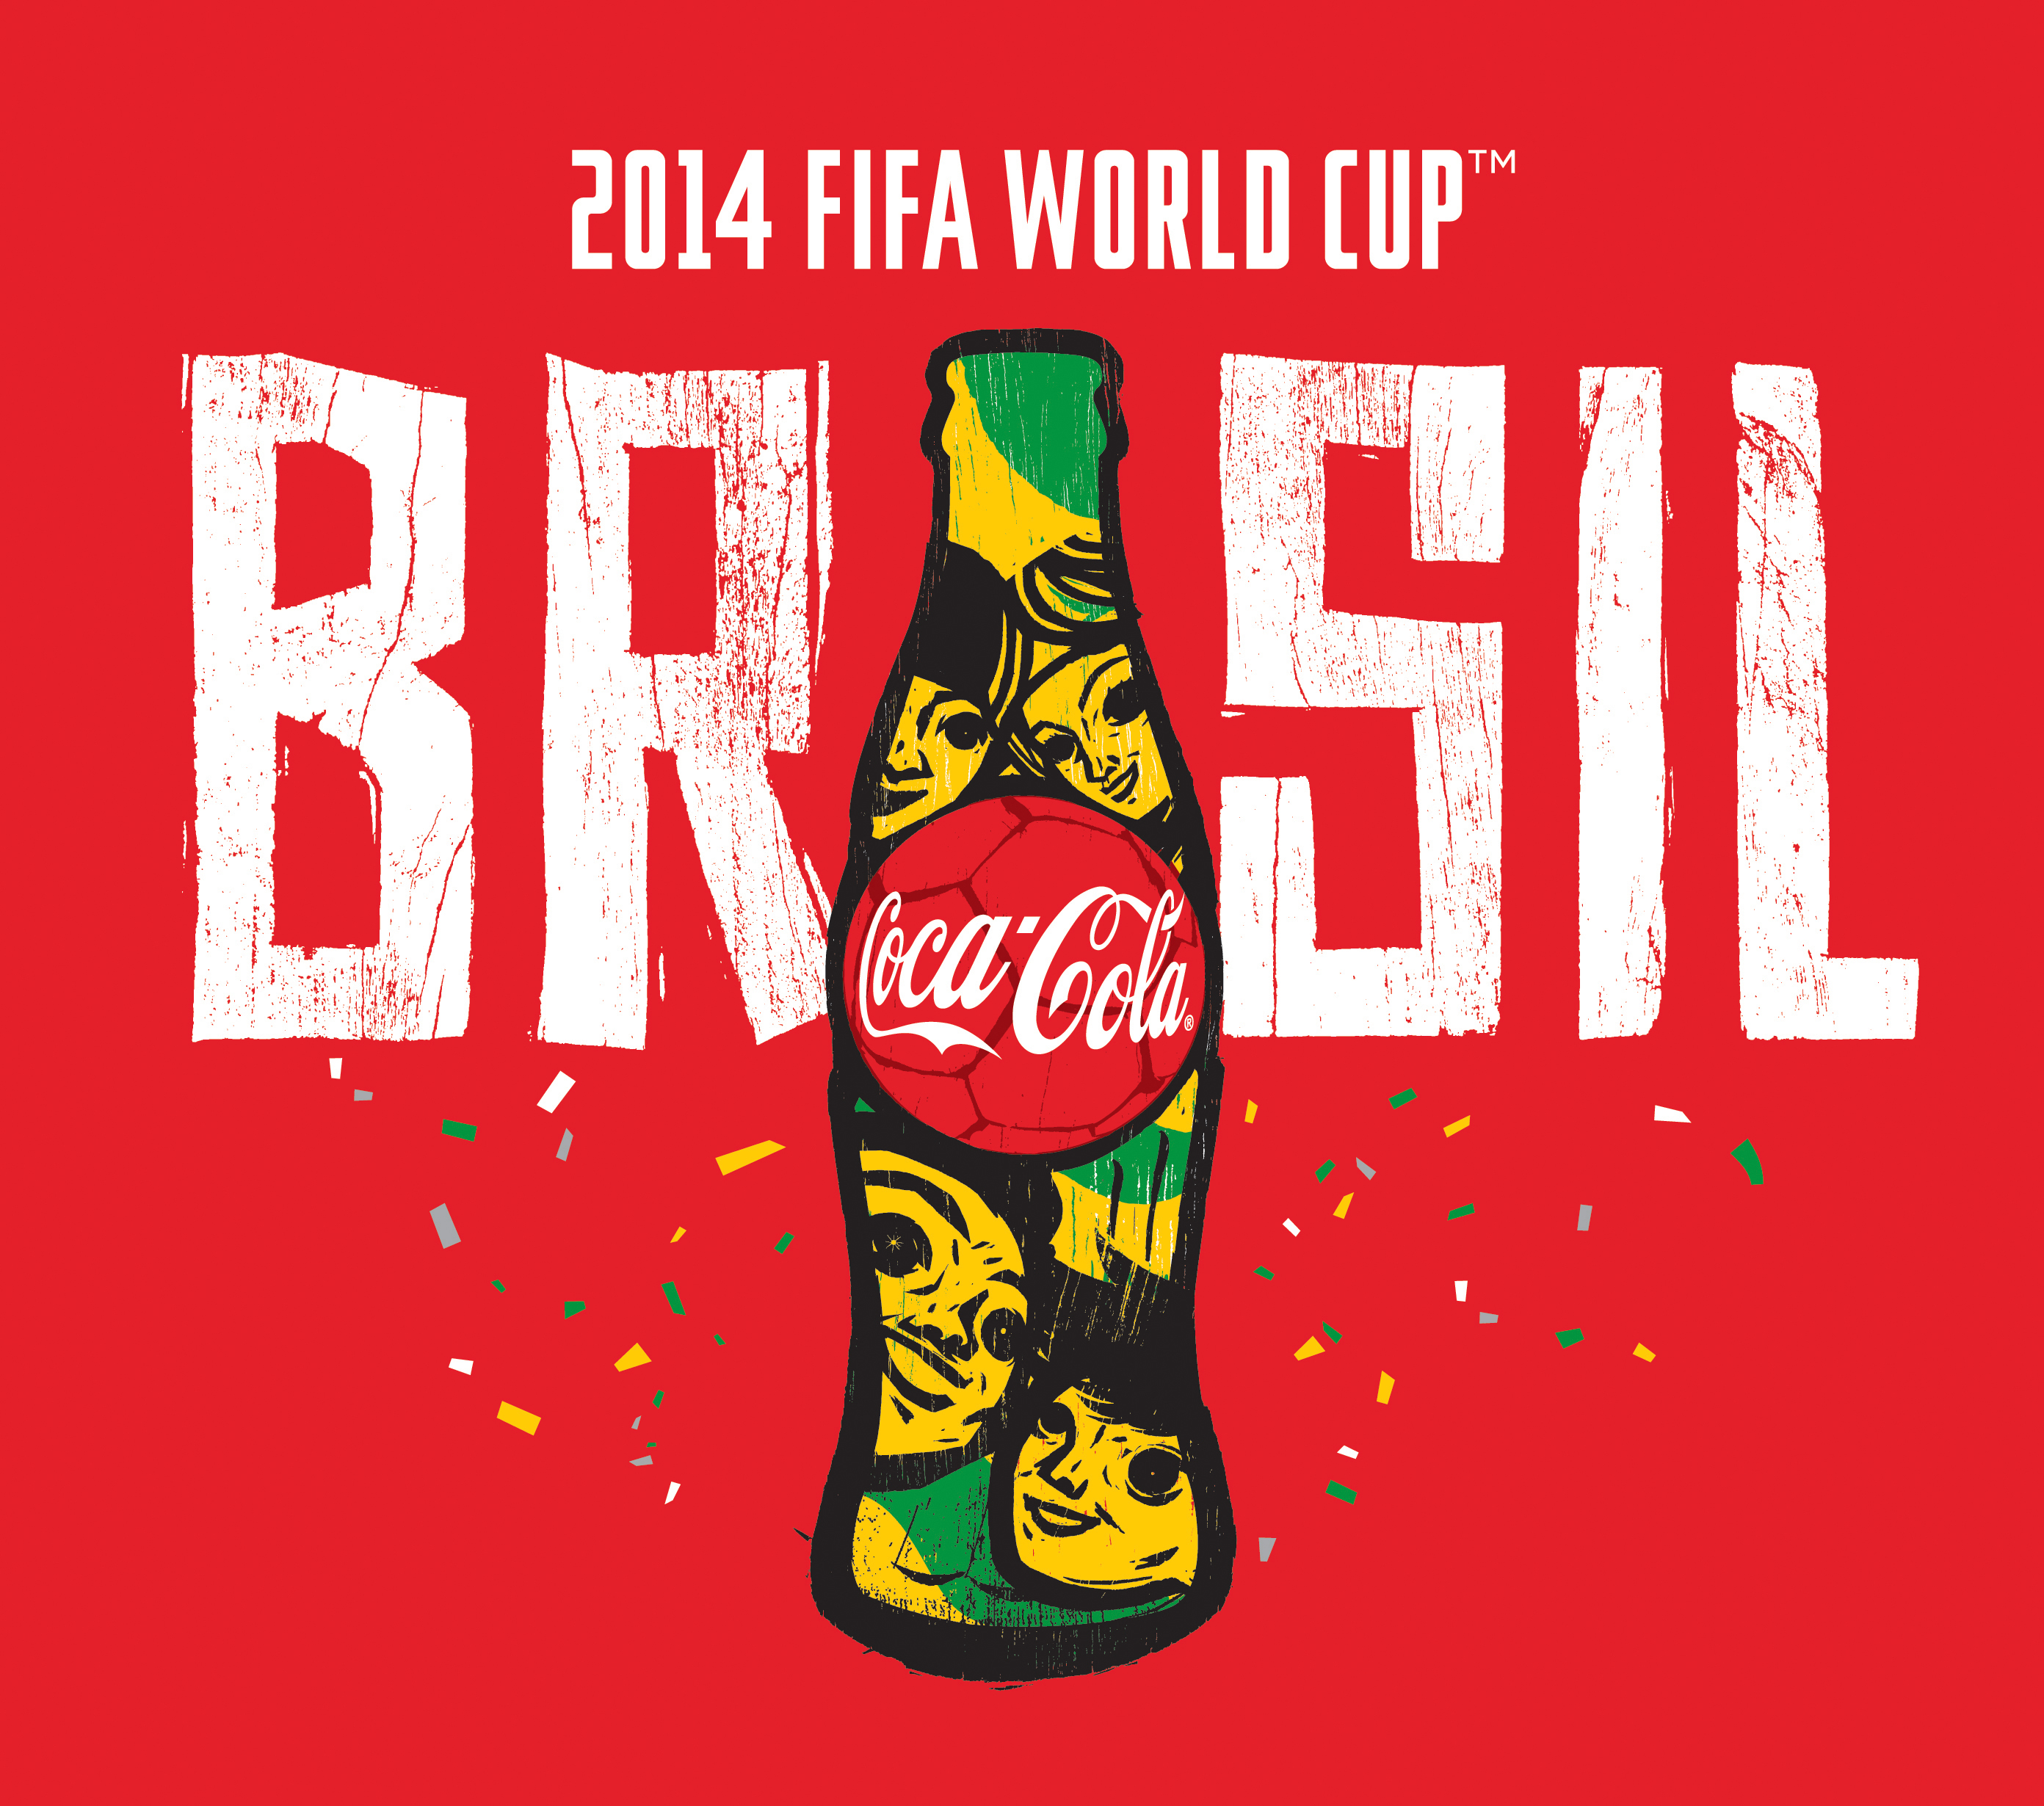 World Cup Ads U.S. Companies in a World Cup Spending Spree ...